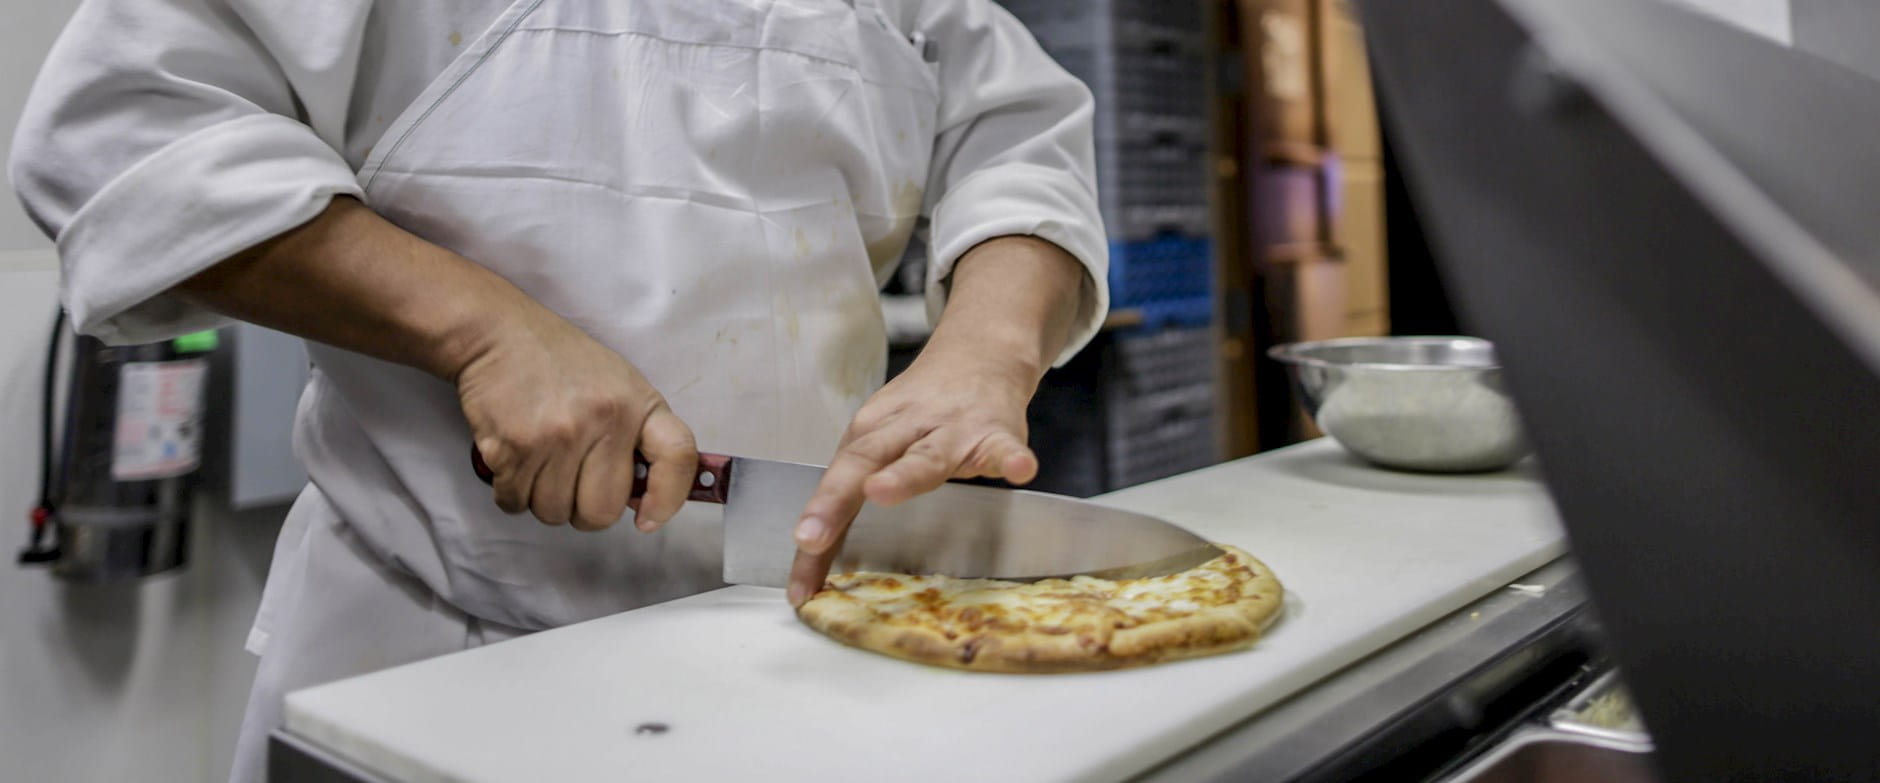 A chef slices a cheese pizza in kitchen